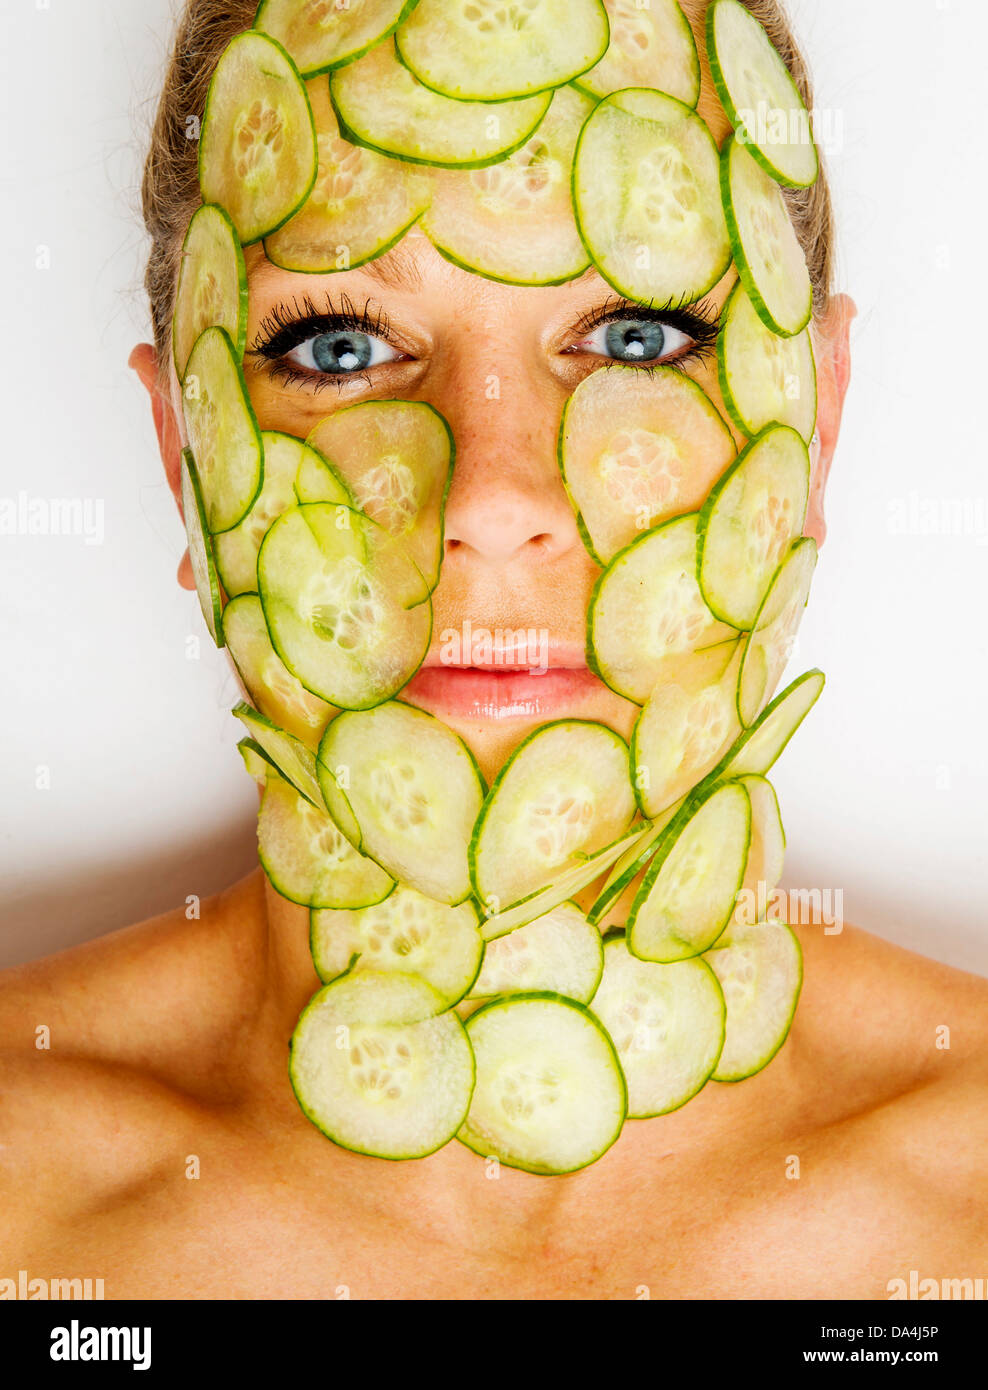 woman with slices of cucumber covering her face Stock Photo